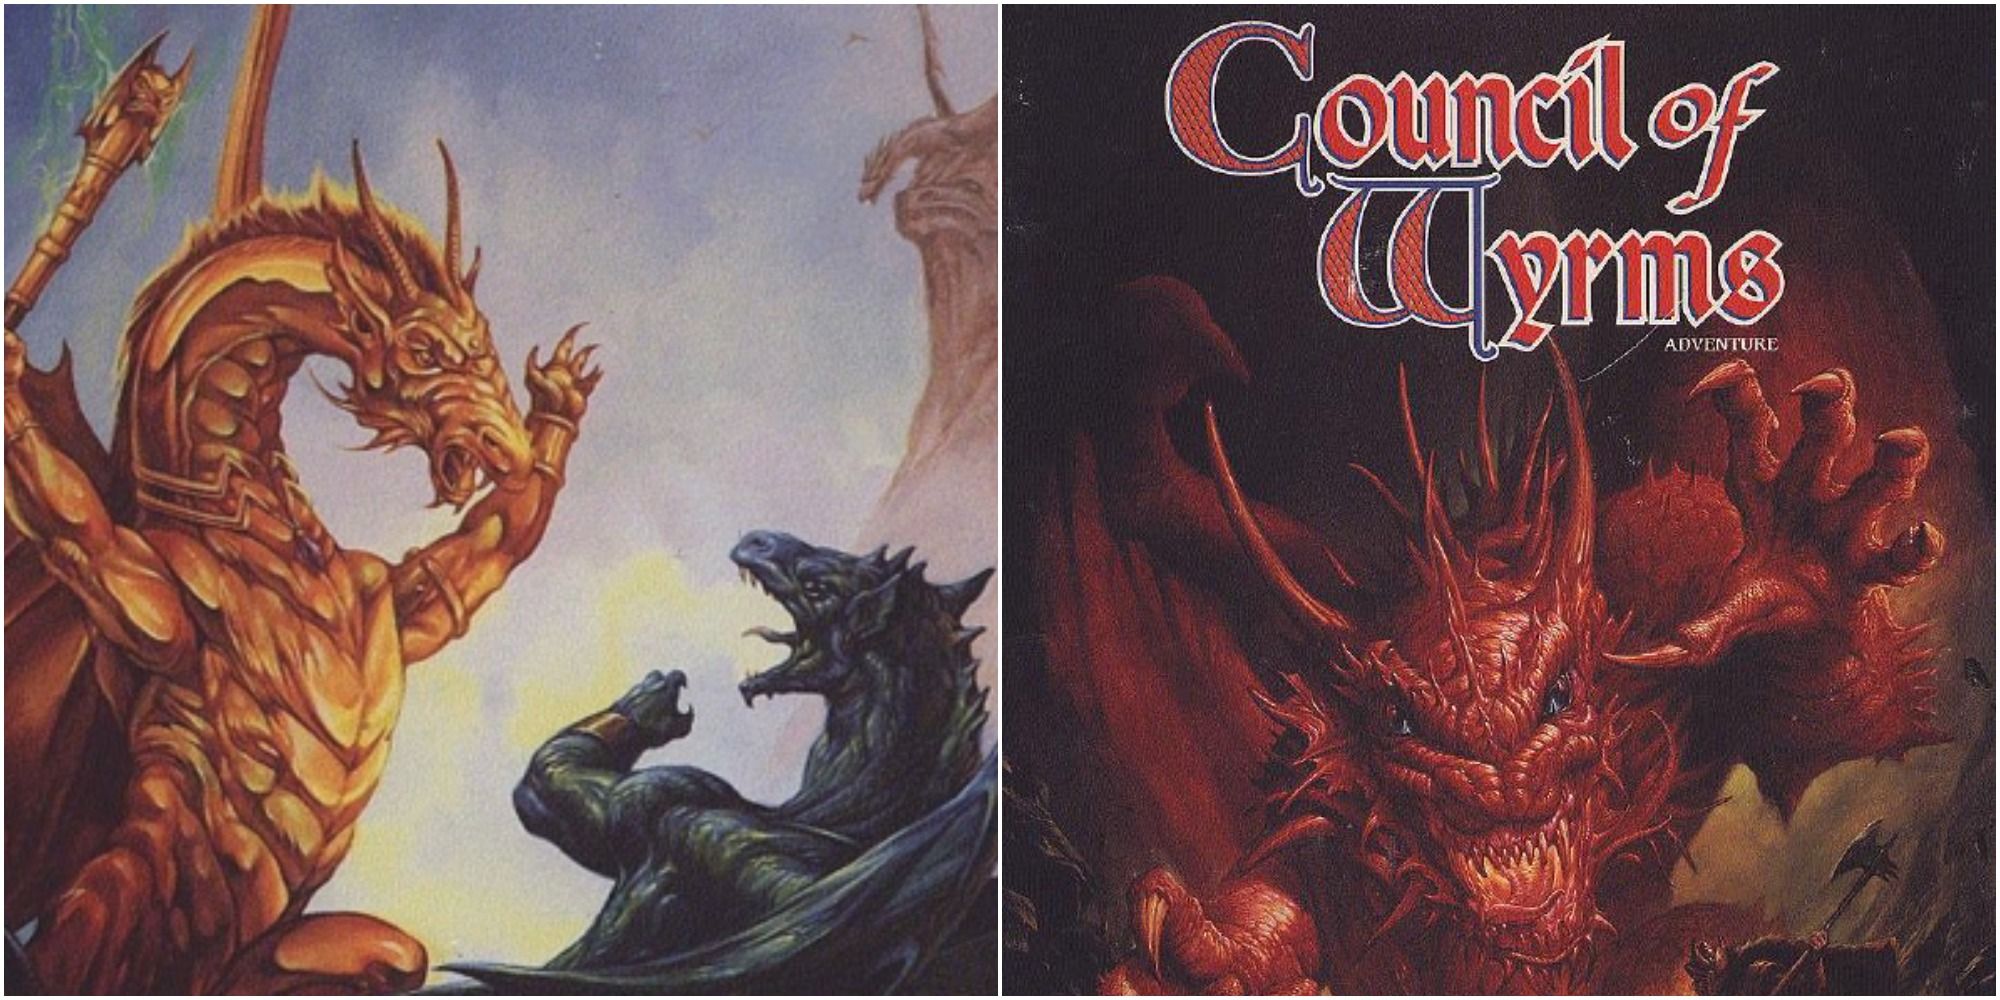 Split image two large draconic creatures clashing and cover of Council Of Wyrms rulebook D&D 